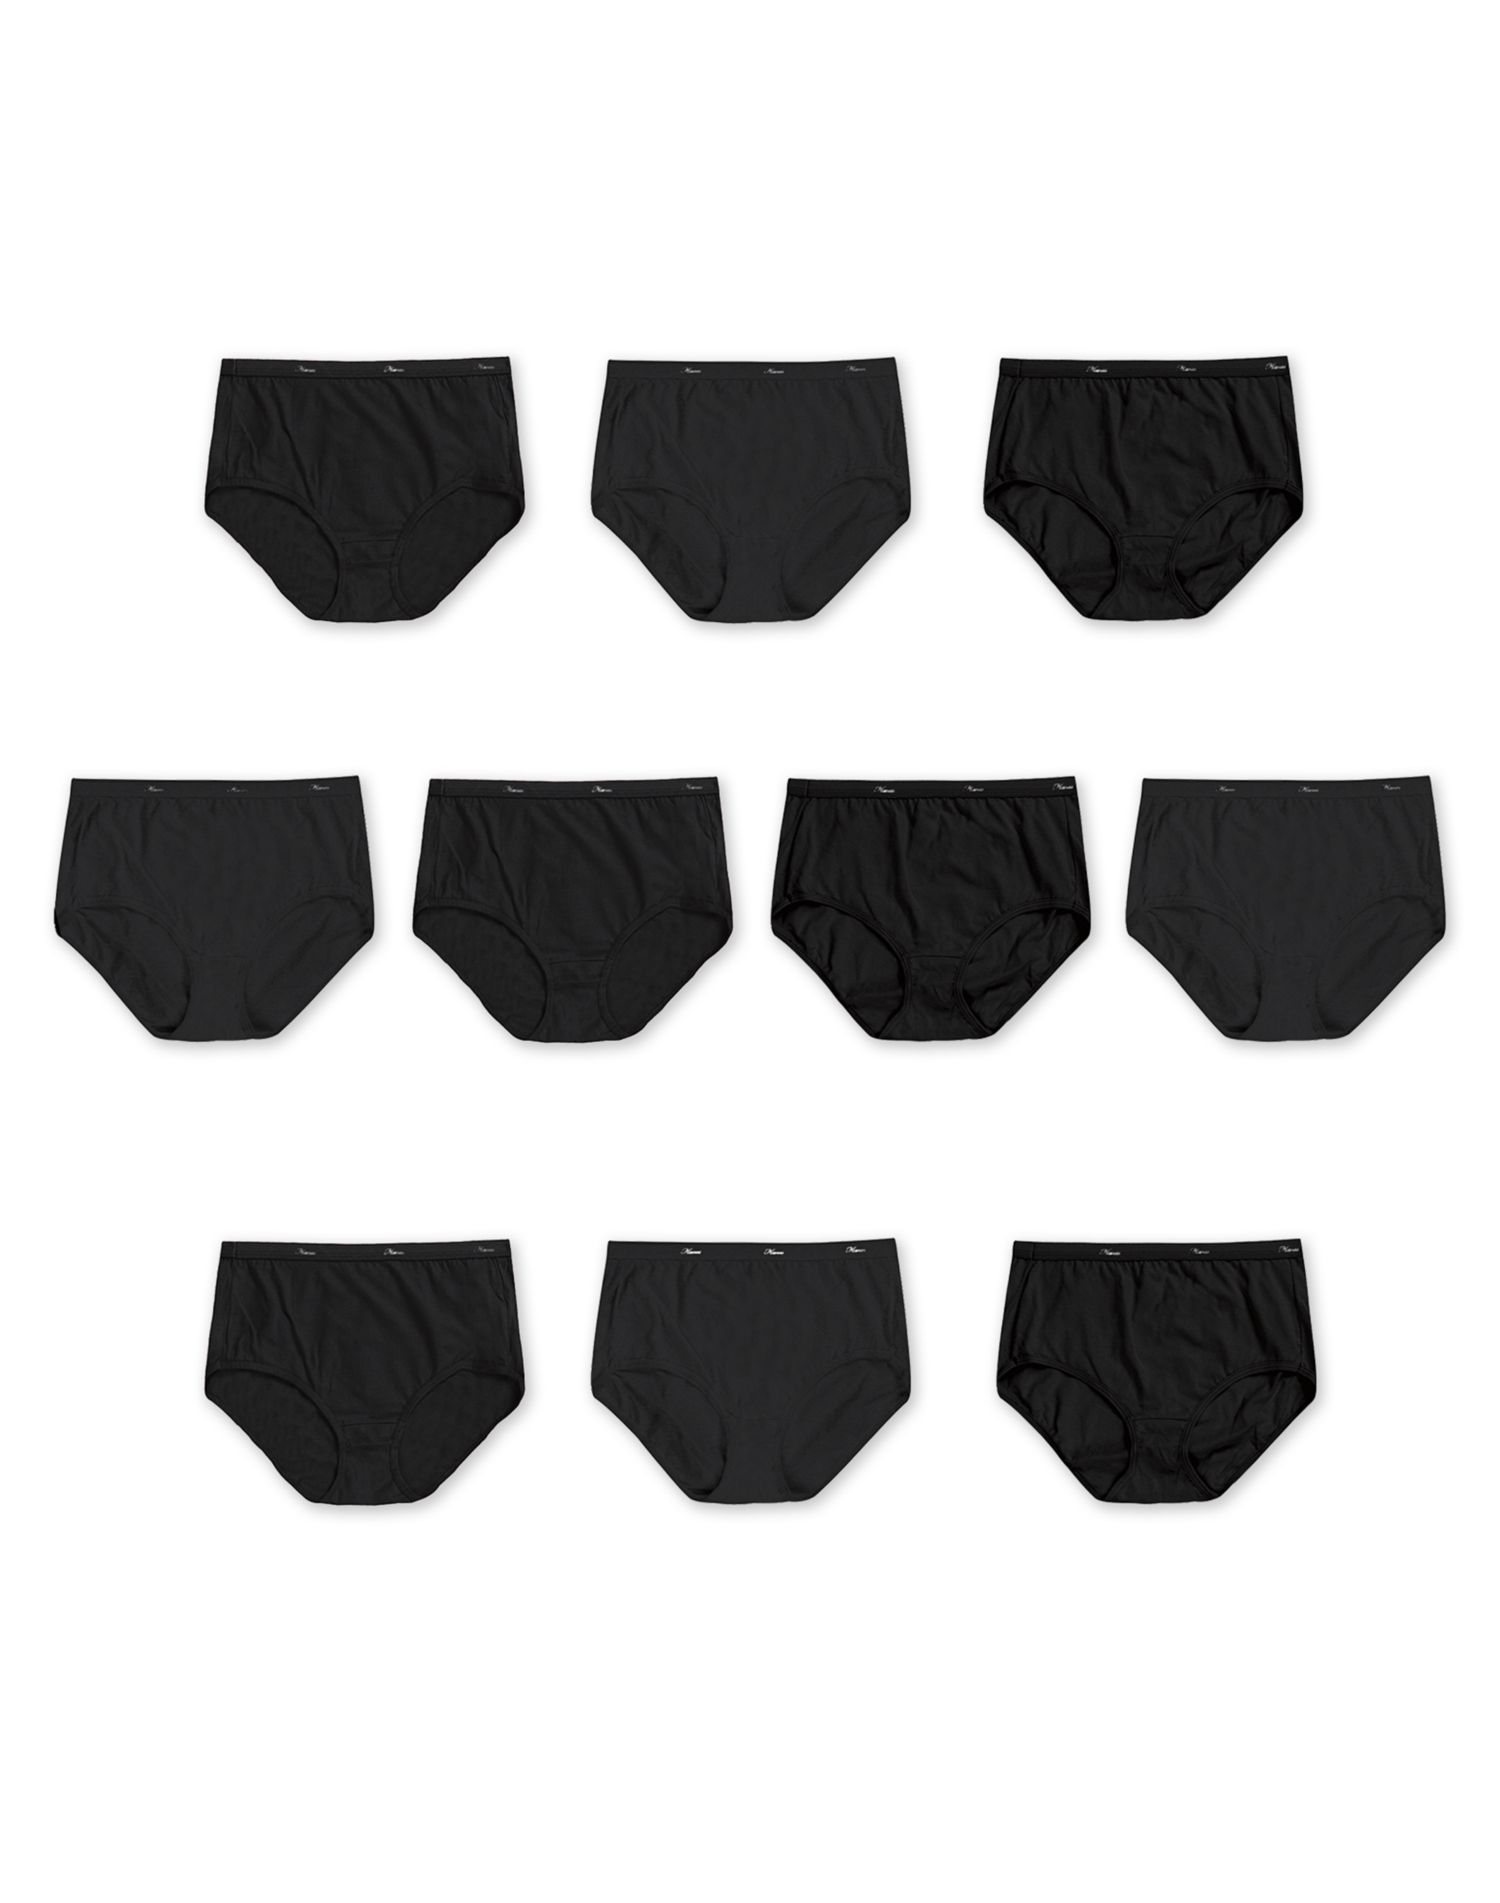 Hanes Womens Breathable Cotton All Black Briefs 10-Pack - Apparel Direct  Distributor